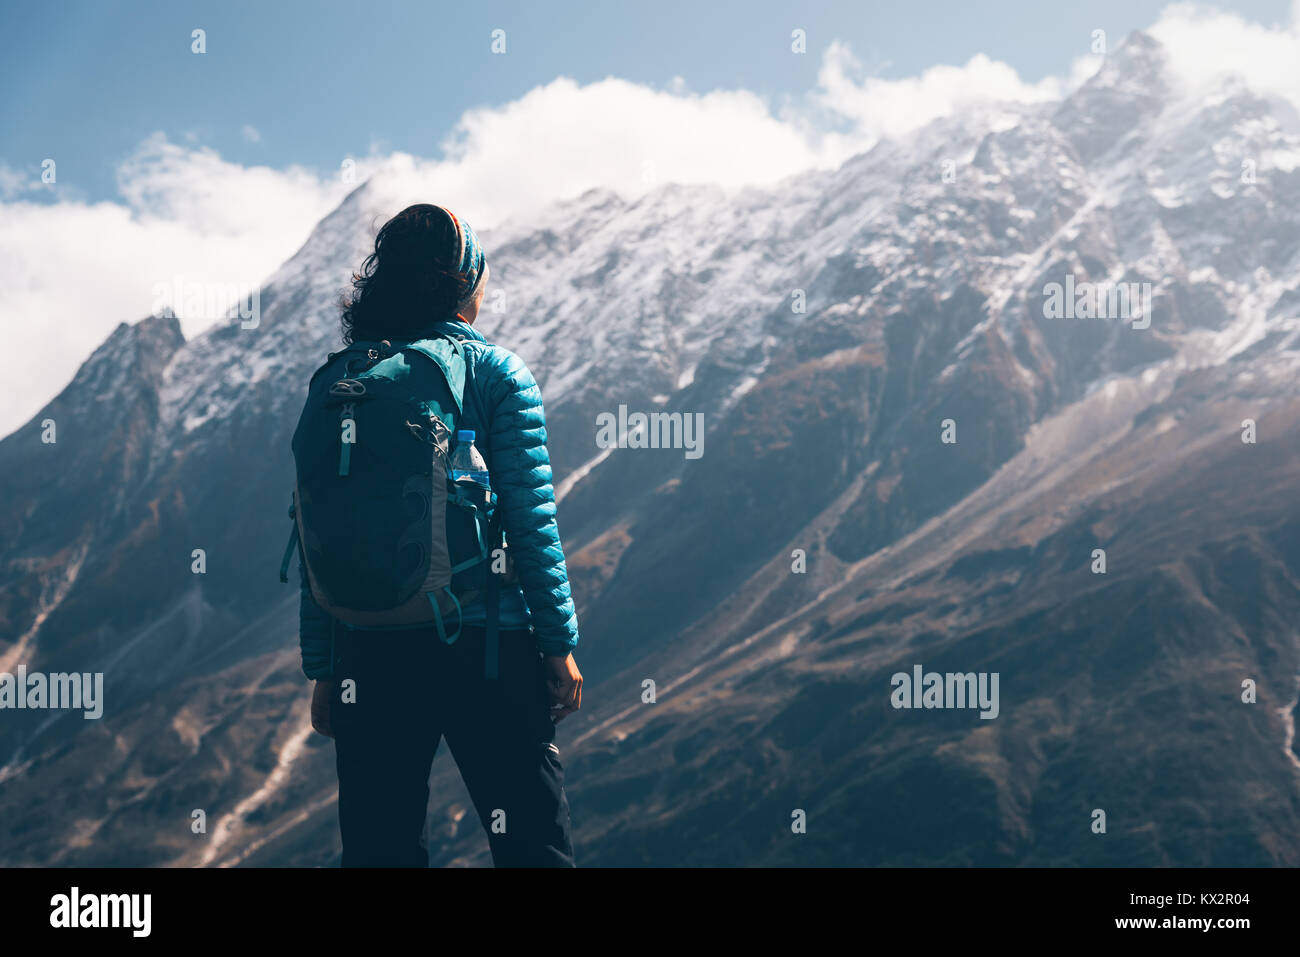 Woman with backpack looking on beautiful mountains in clouds at sunrise. Landscape with girl, high rocks with snowy peaks, blue sky with clouds in Nep Stock Photo